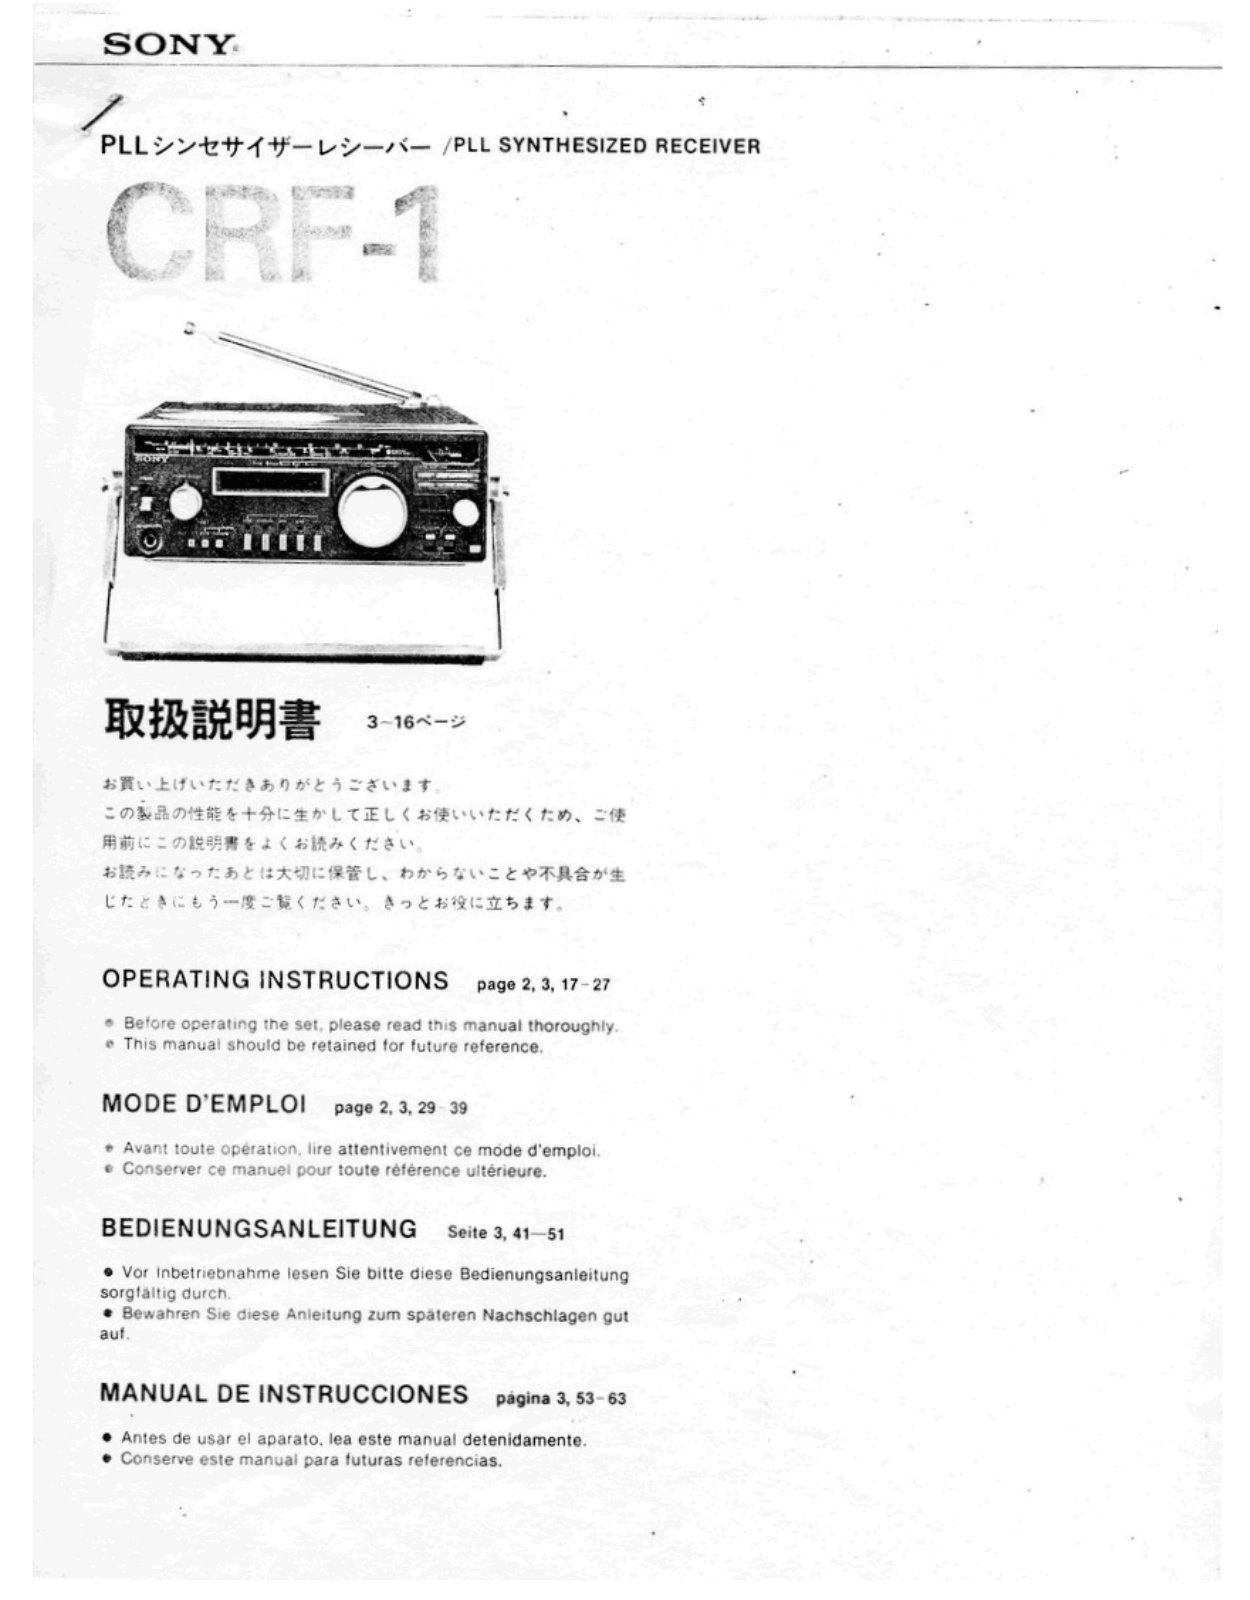 Sony CRF-1 Owners manual